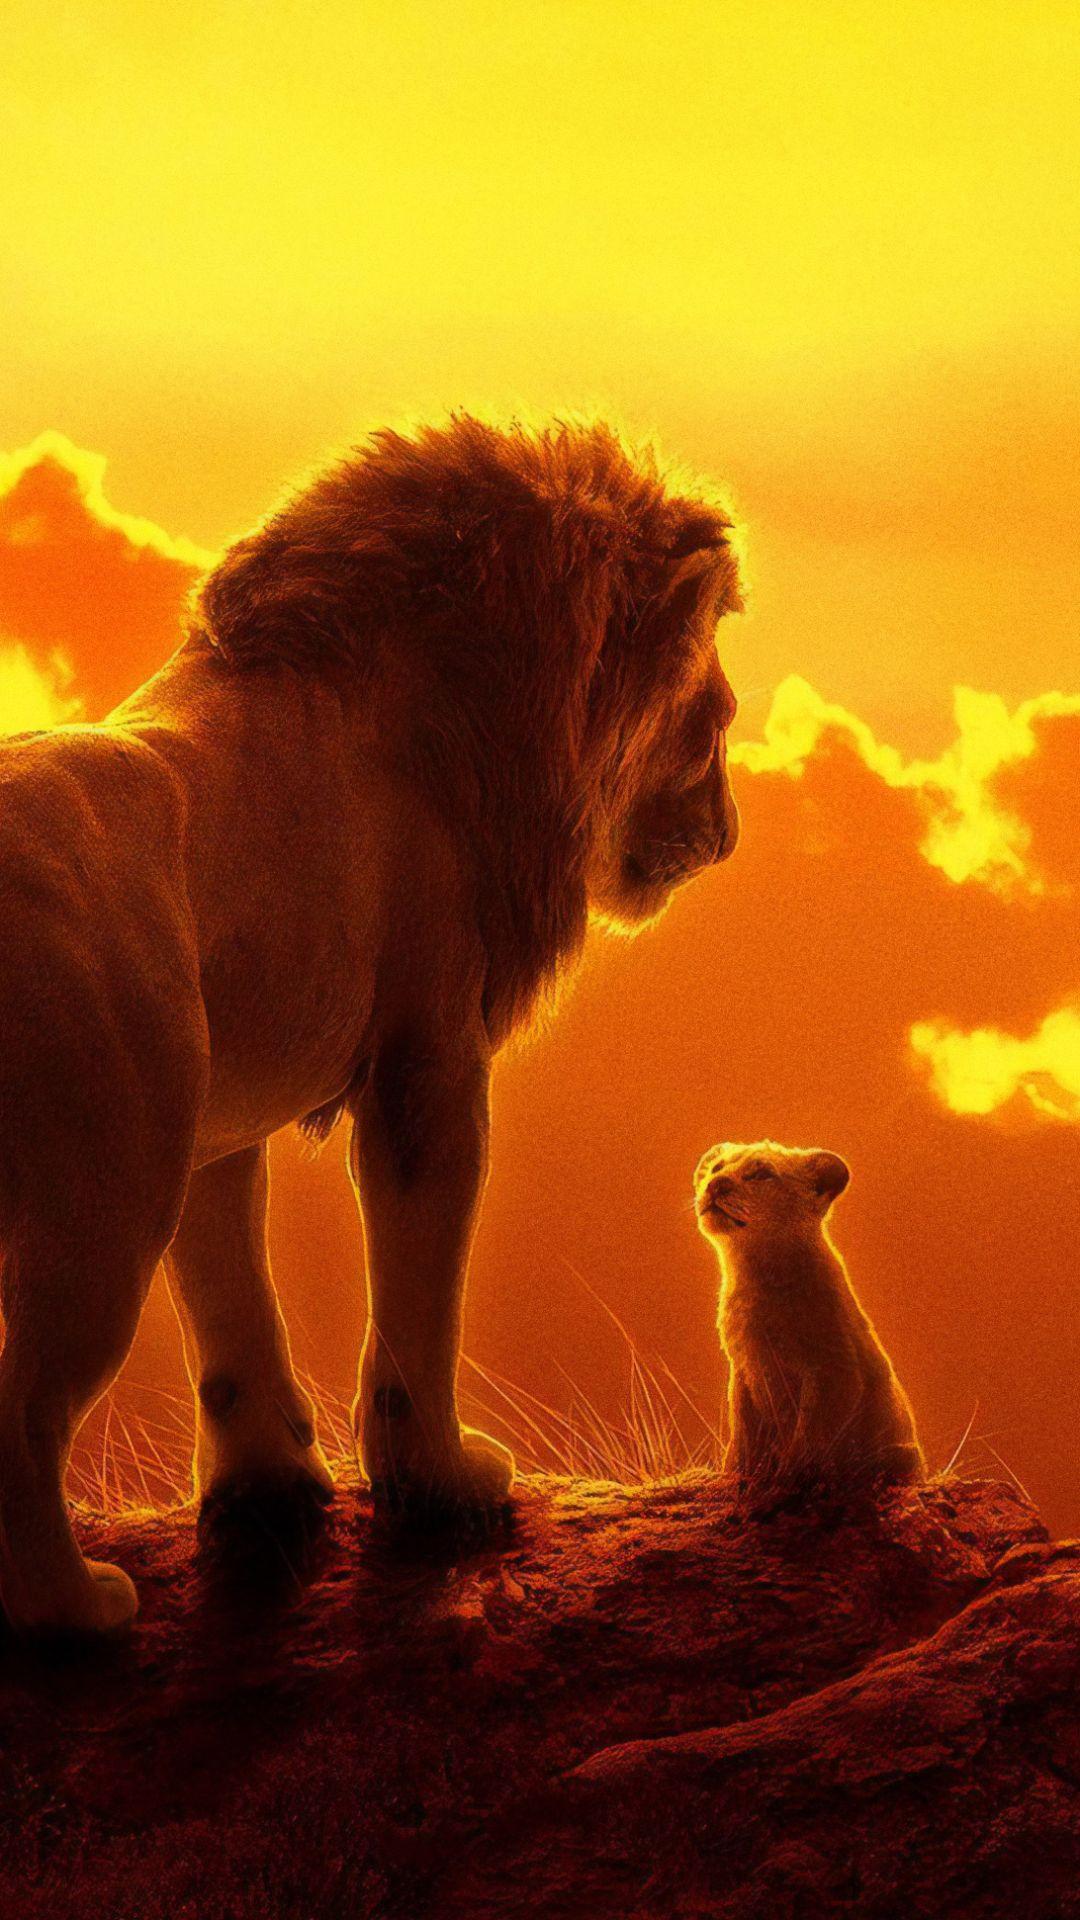 The Lion King 2019 Wallpapers - Top Free The Lion King 2019 Backgrounds